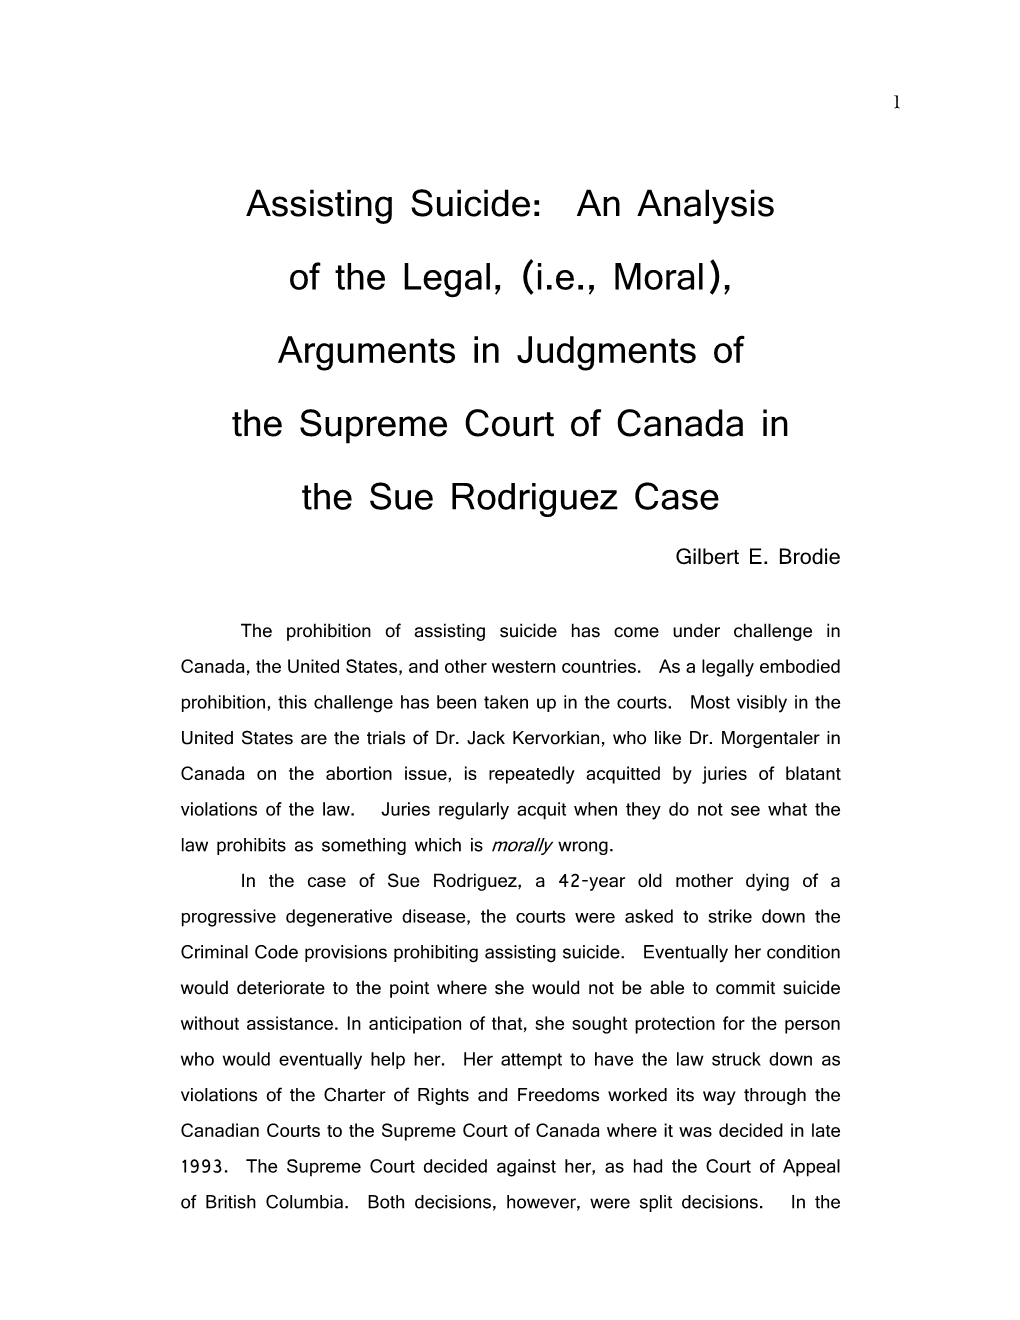 (Ie, Moral), Arguments in Judgments of the Supreme Court of Canada In